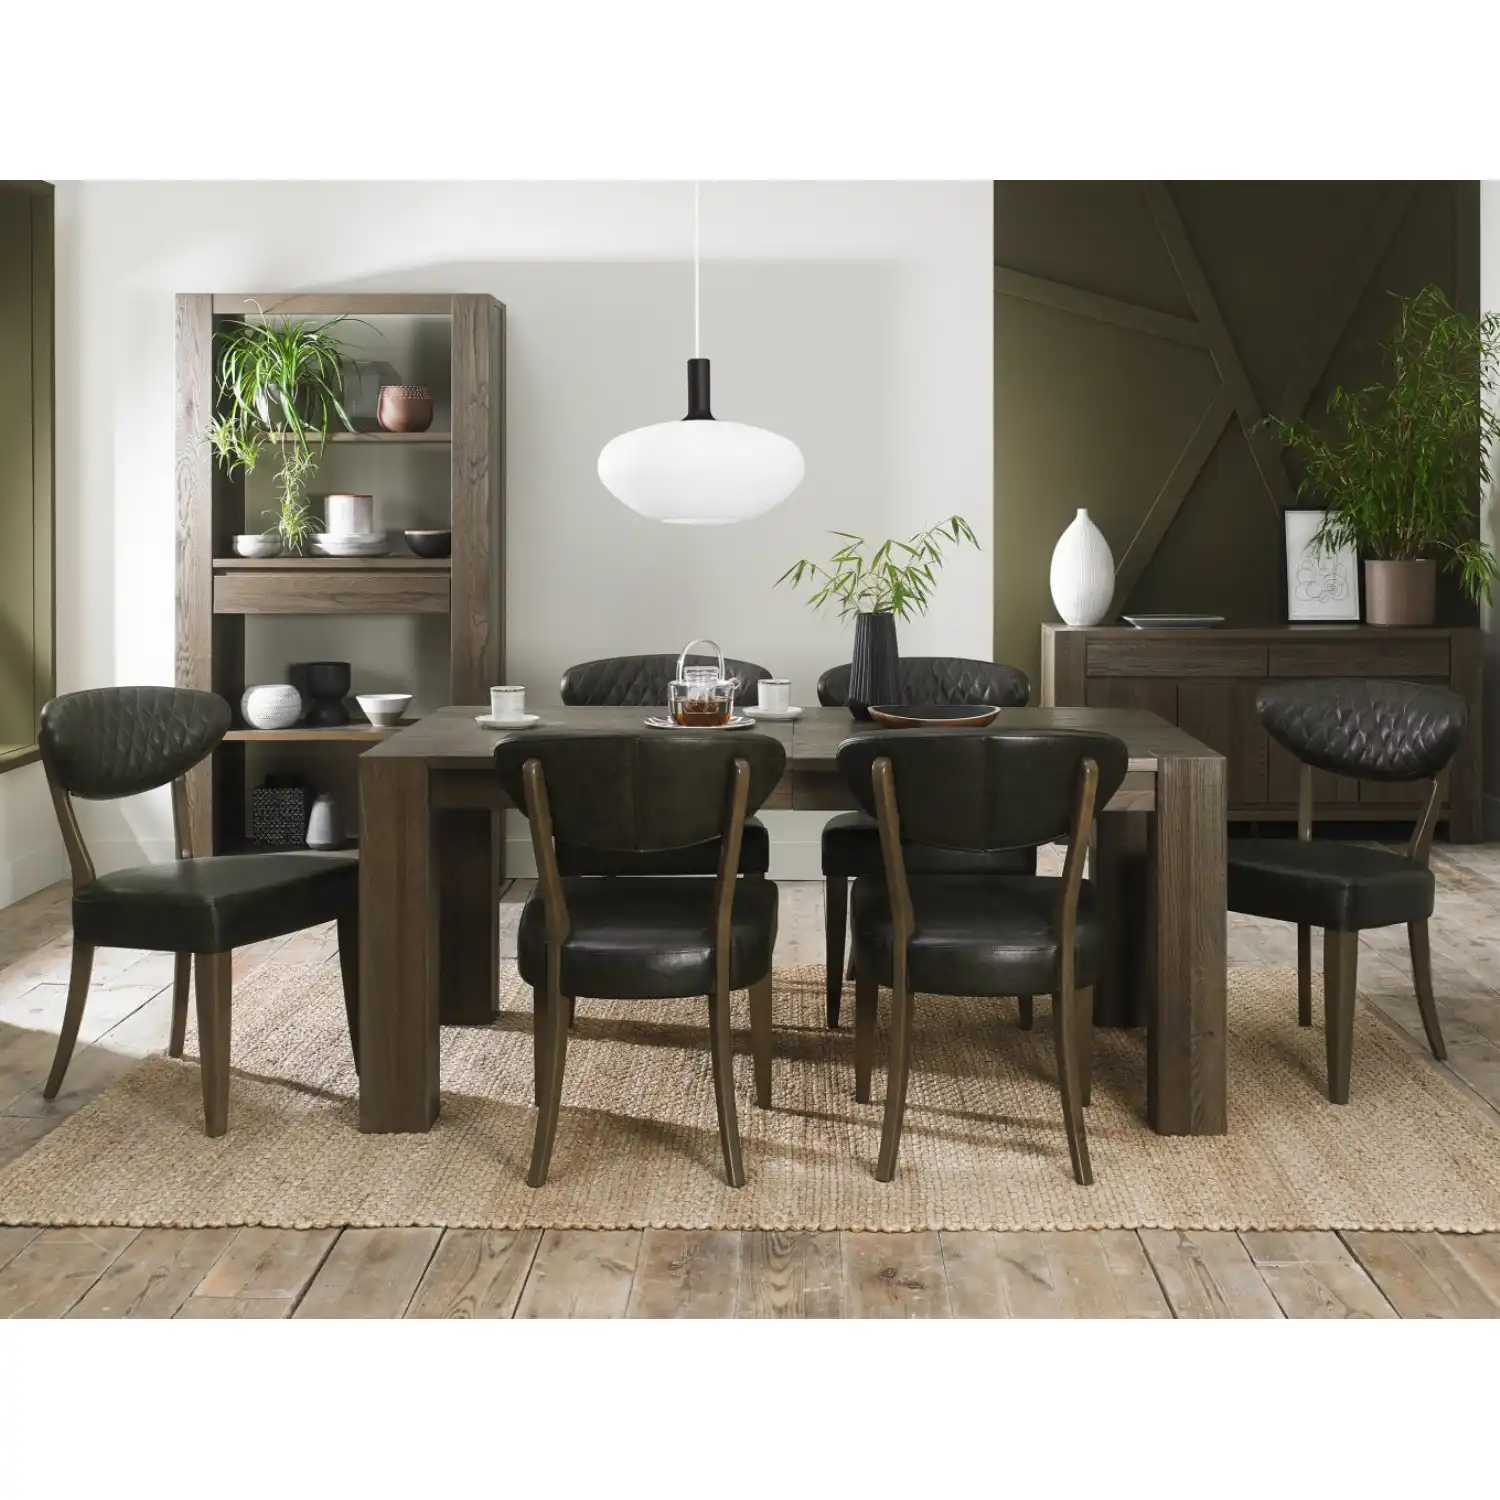 Oak Extending Dining Table Set 6 Dark Grey Leather Chairs